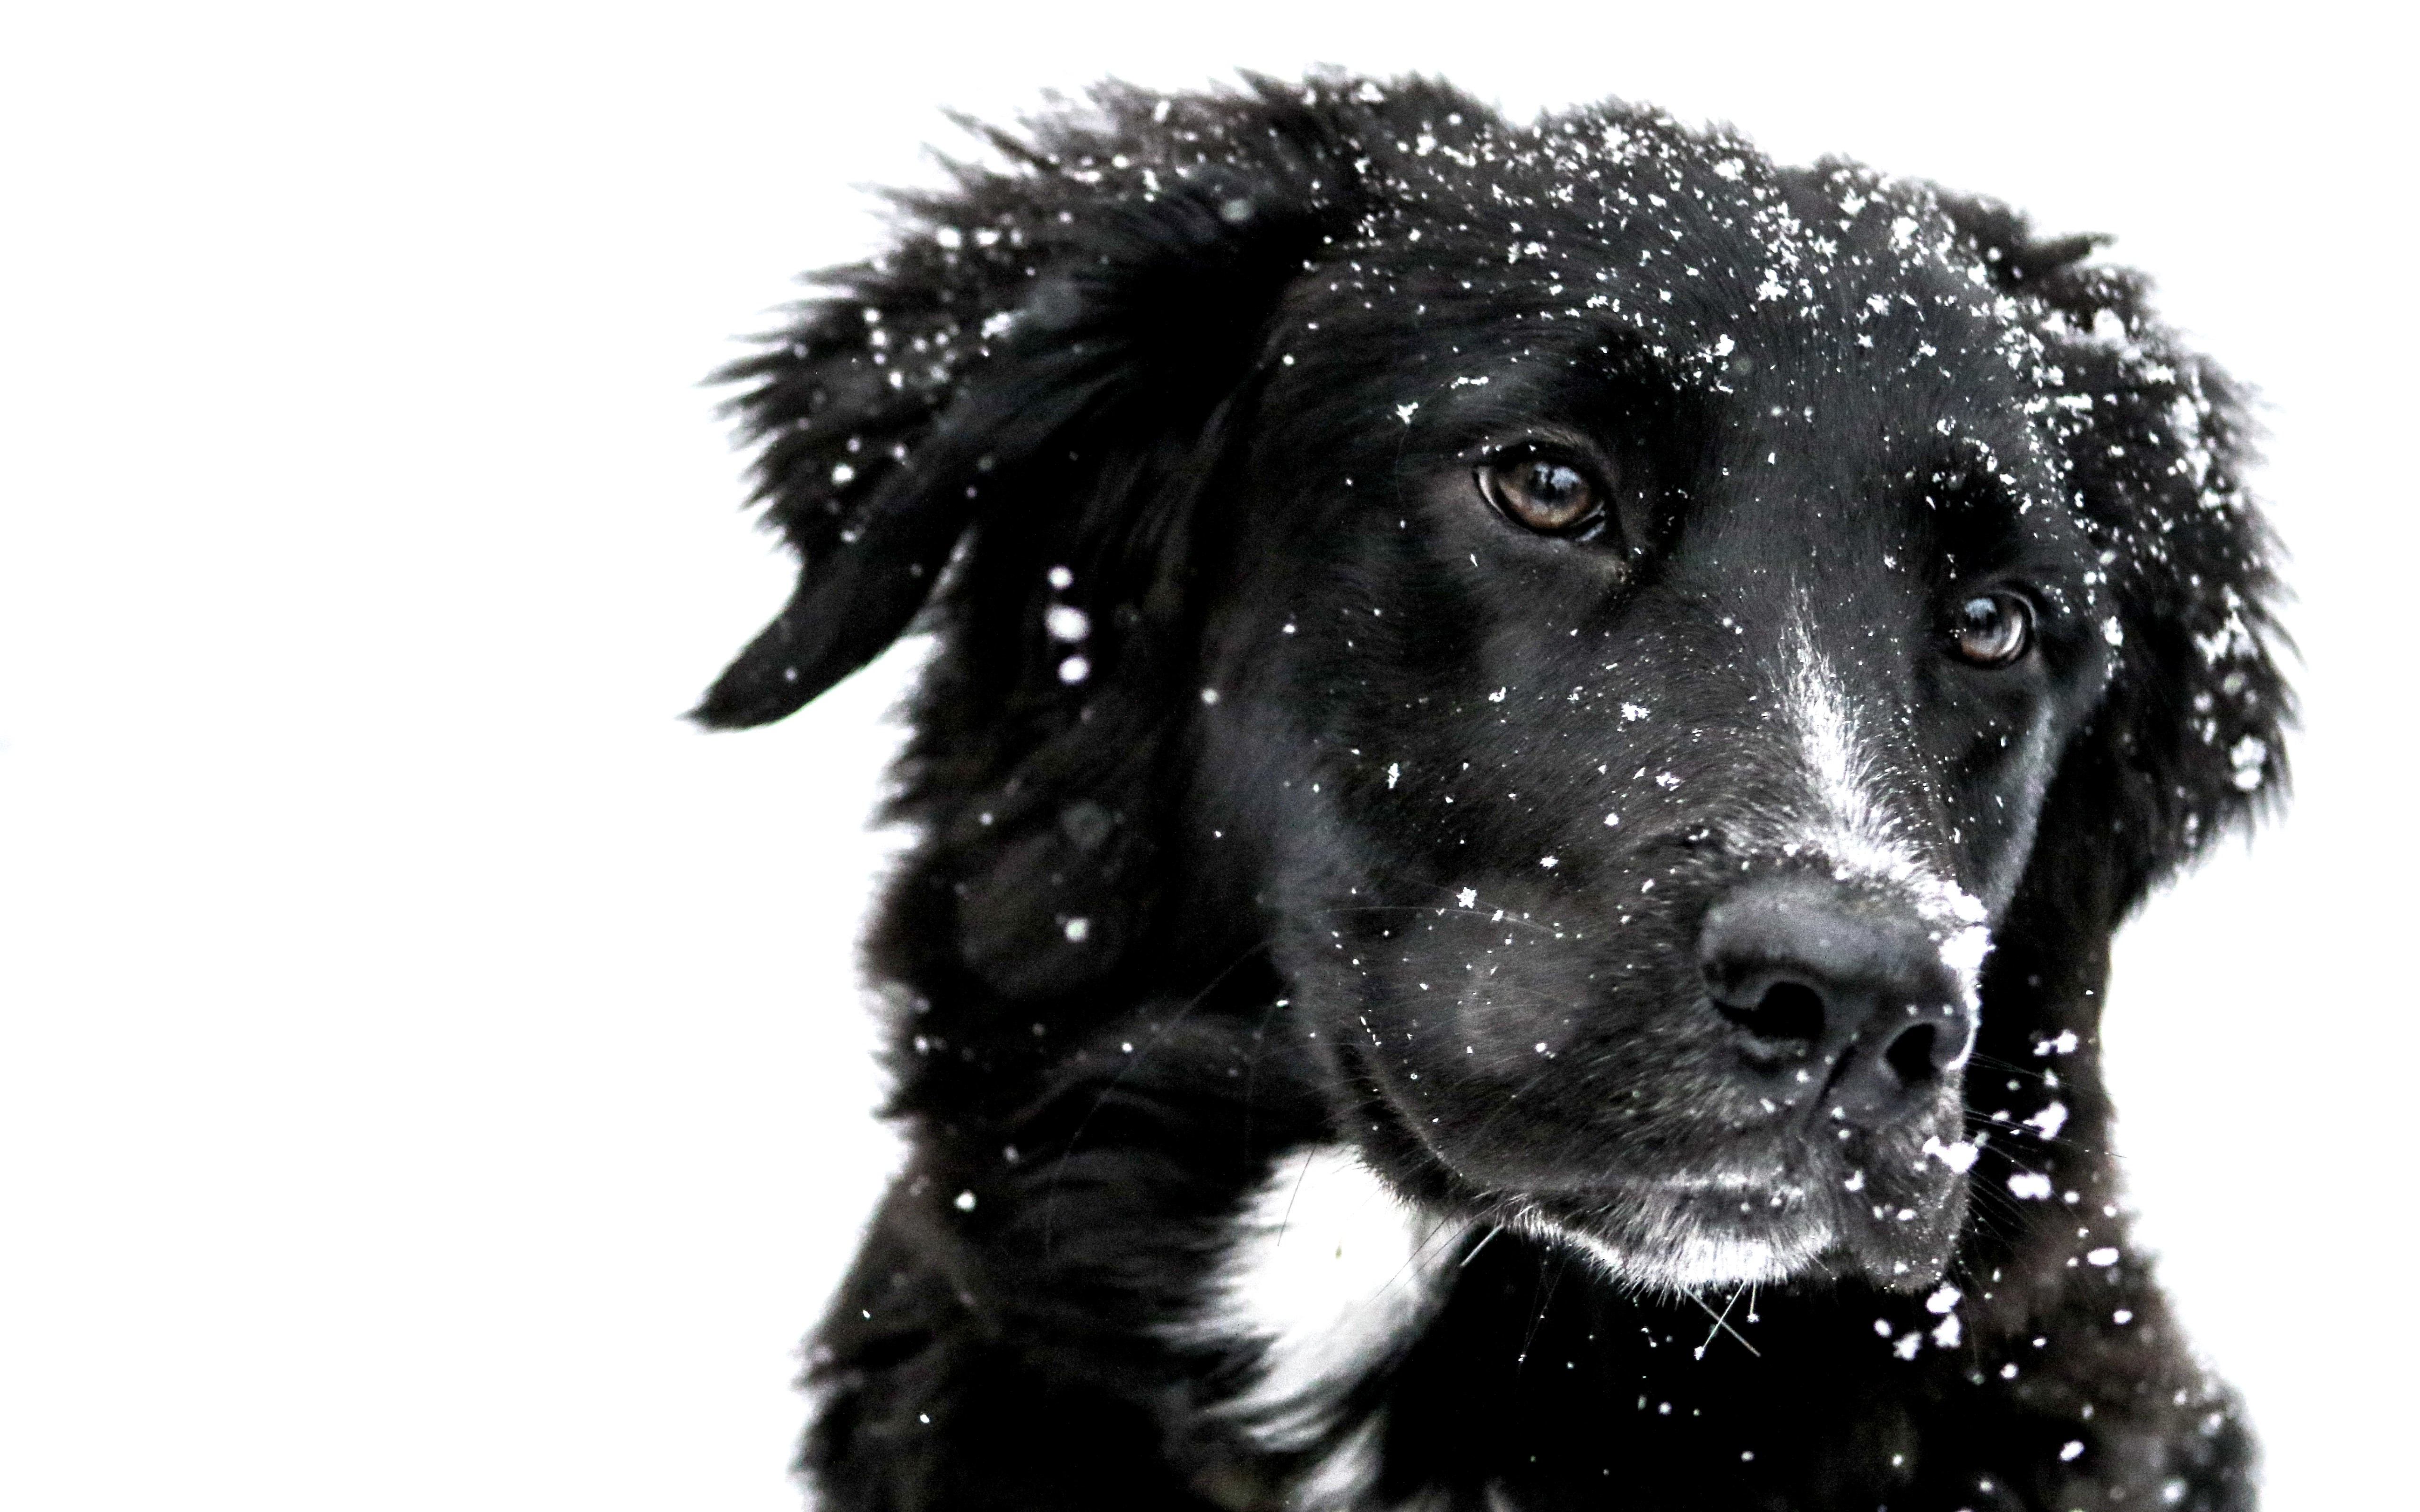 Snowing over the cute dog wallpaper 5120x3200